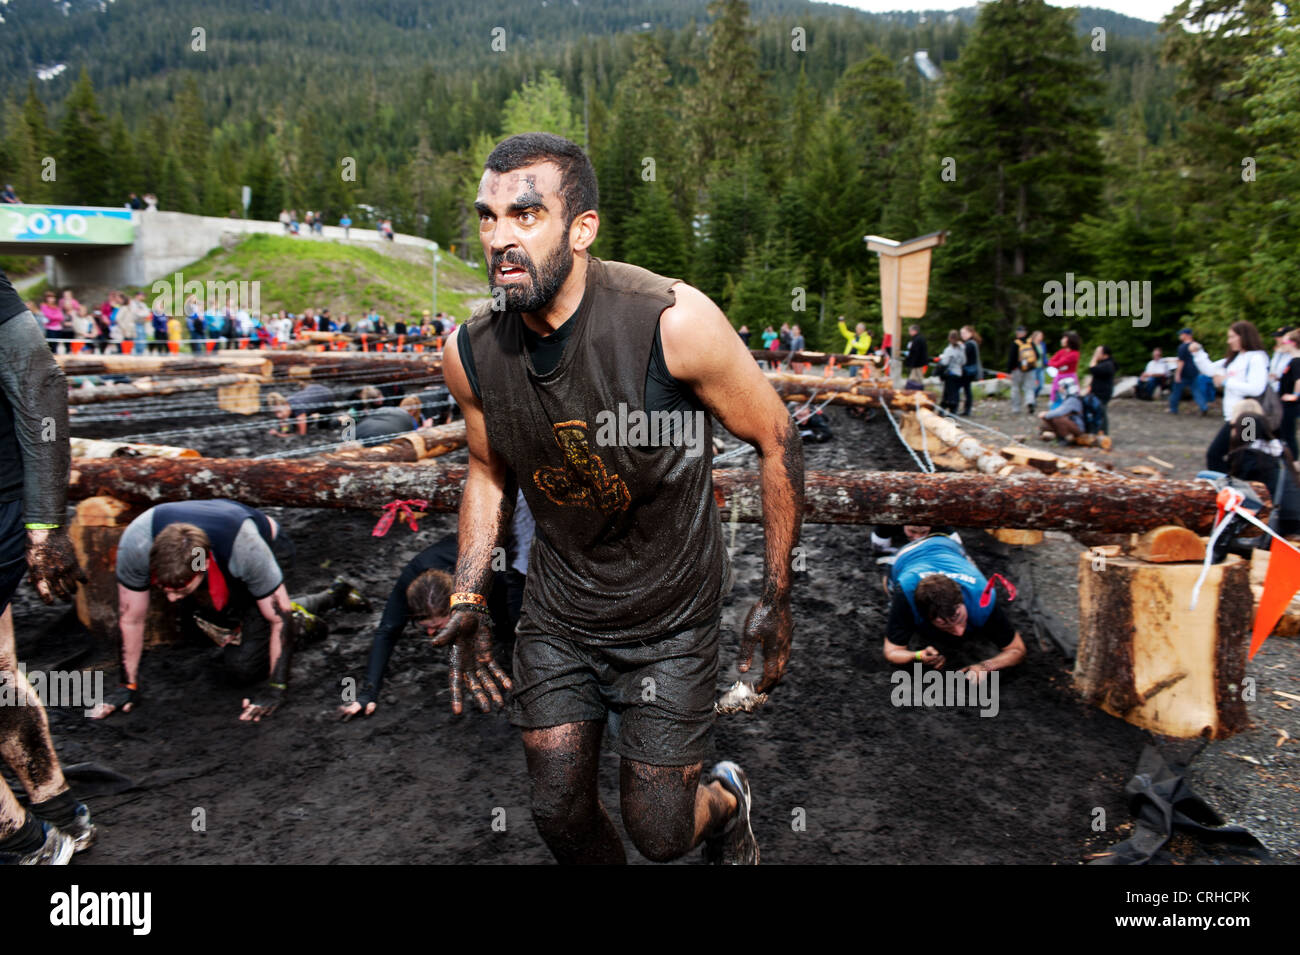 Participants in the 2012 Vancouver Tough Mudder event at the Whistler Olympic Park. Whistler BC, Canada. Stock Photo